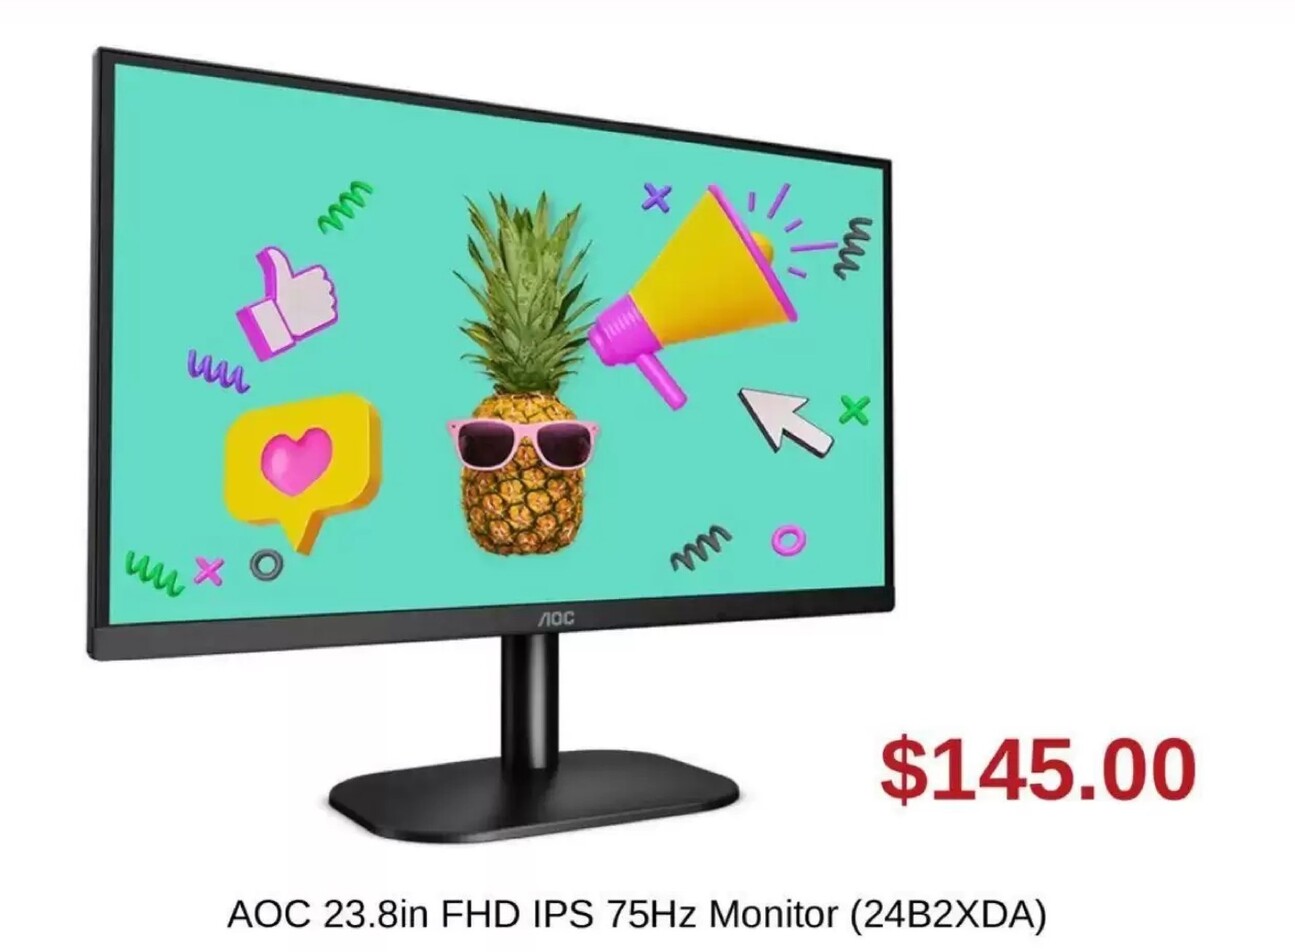 Aoc 23.8in Fhd Ips 75hz Monitor offers at $145 in MSY Technology